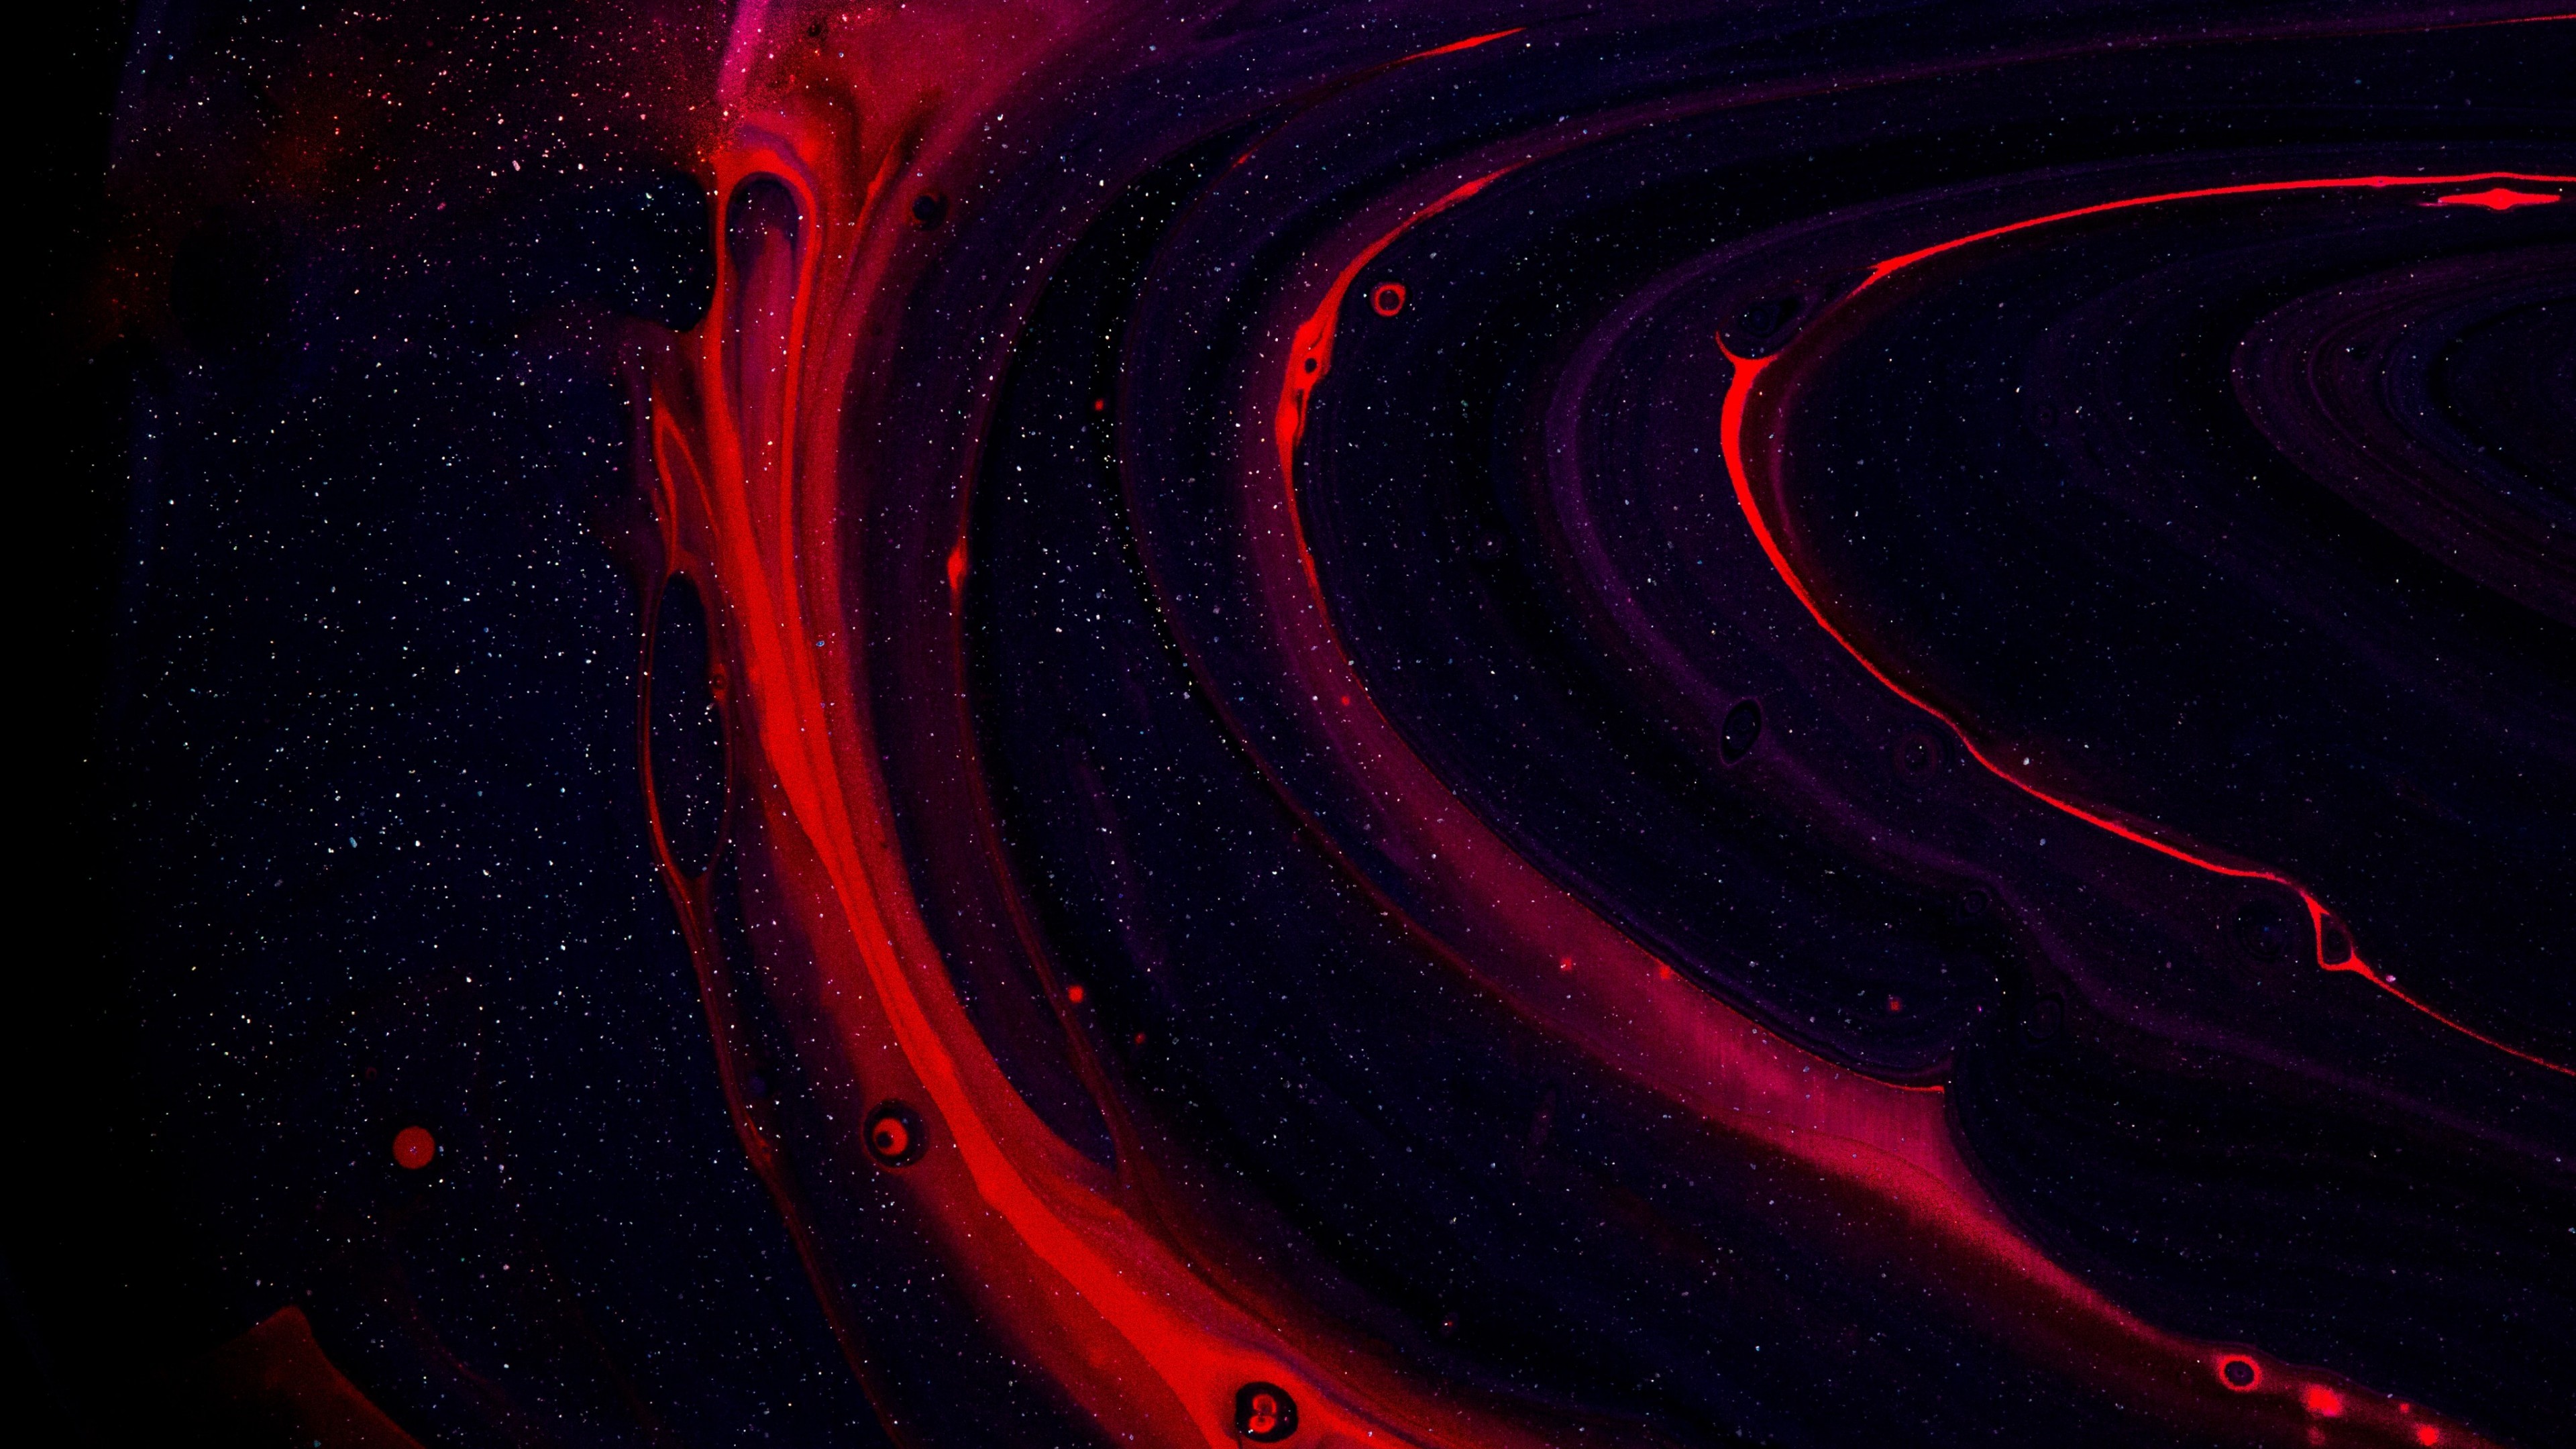 Liquid 4K wallpaper for your desktop or mobile screen free and easy to download